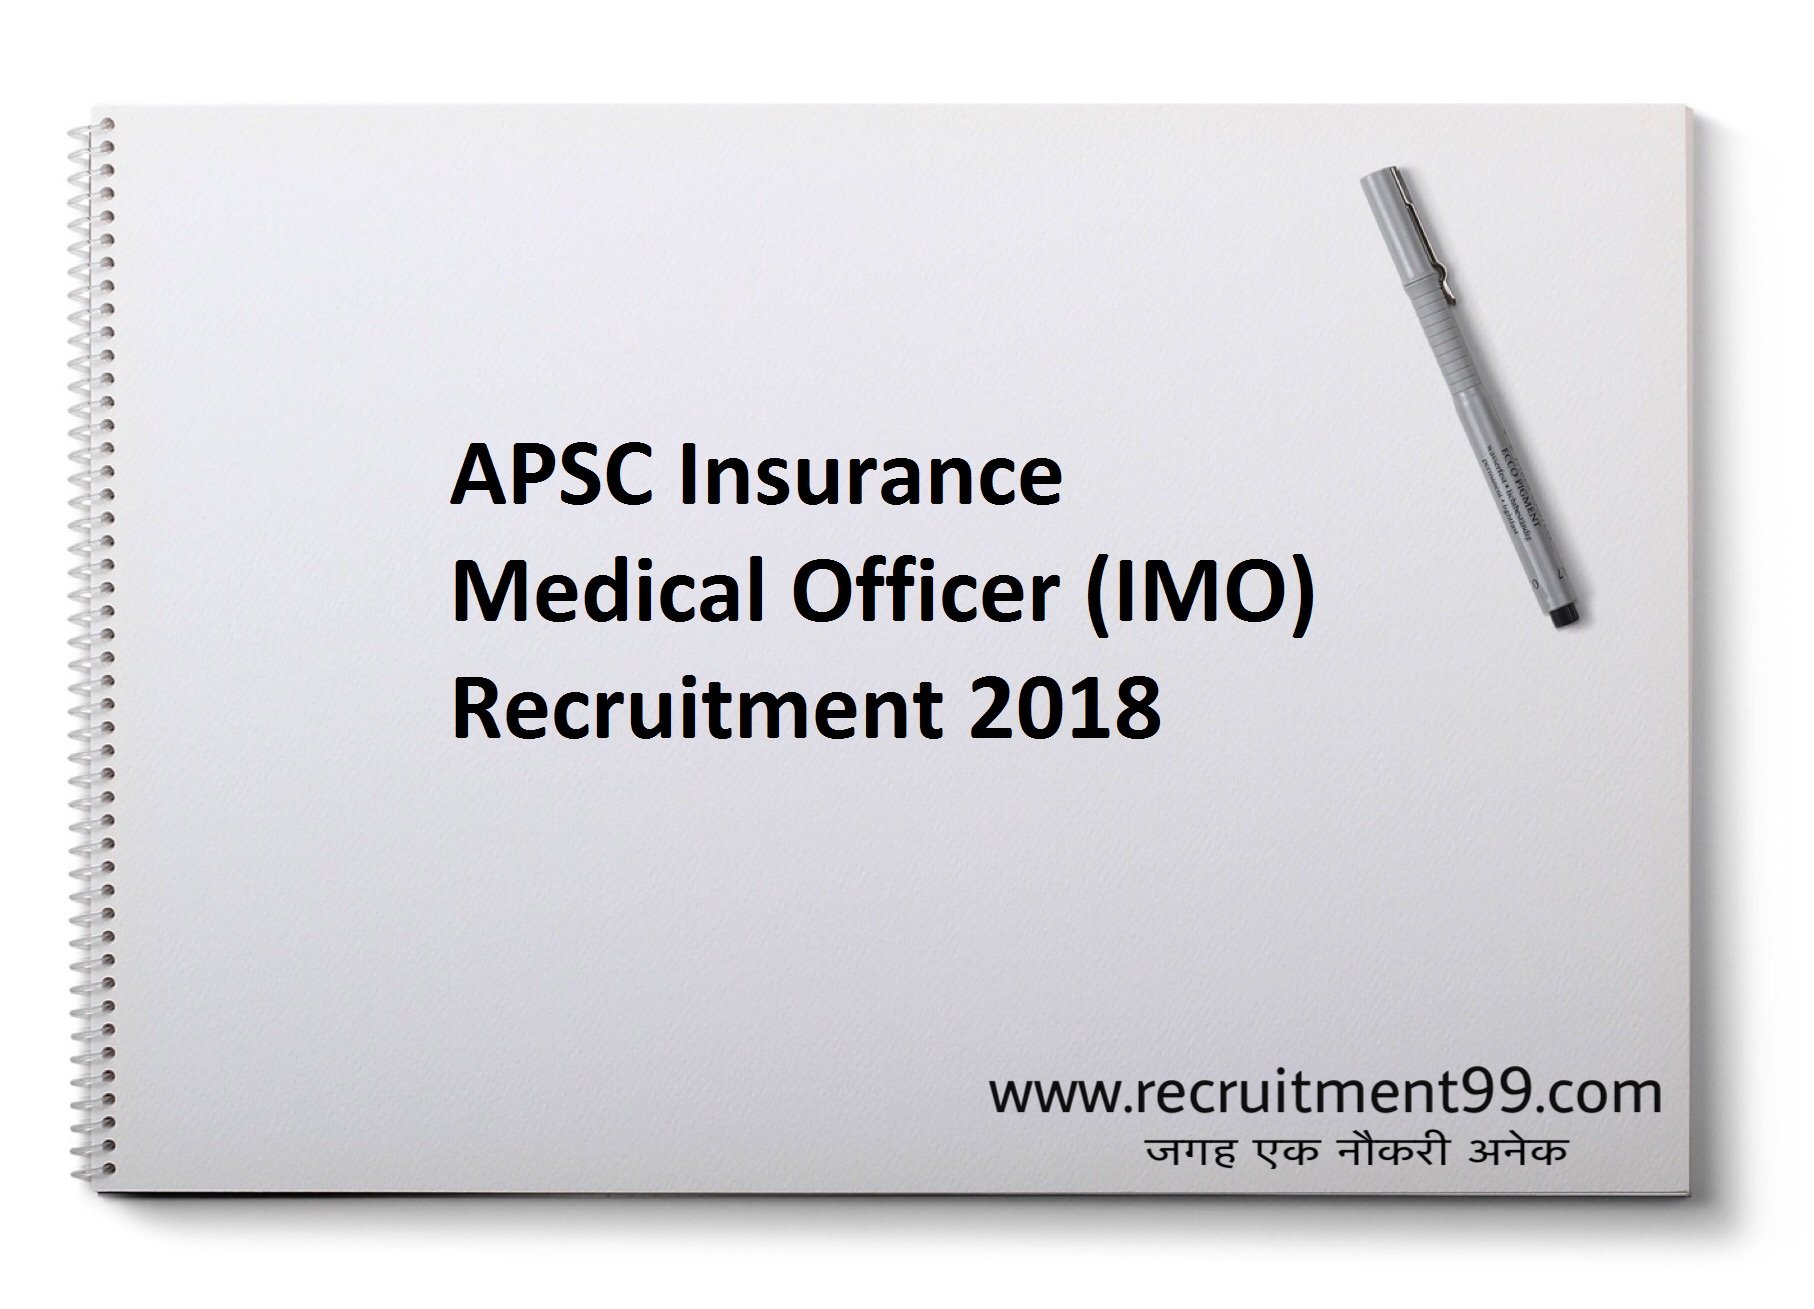 APSC Insurance Medical Officer (IMO) Recruitment Admit Card Result 2018